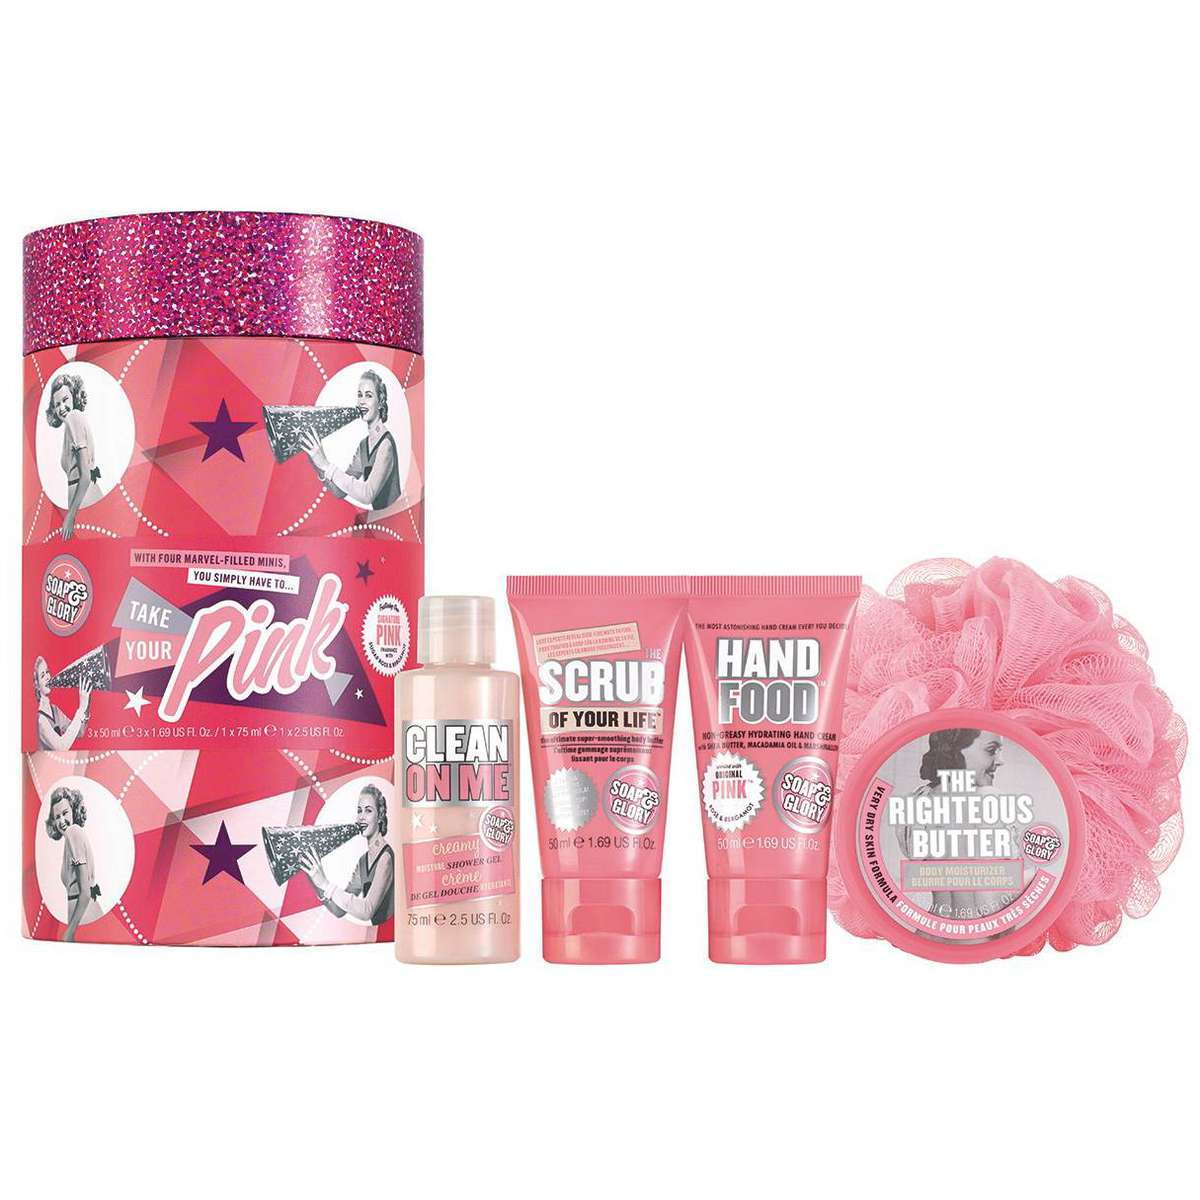 Soap & Glory Take Your Pink Gift Set